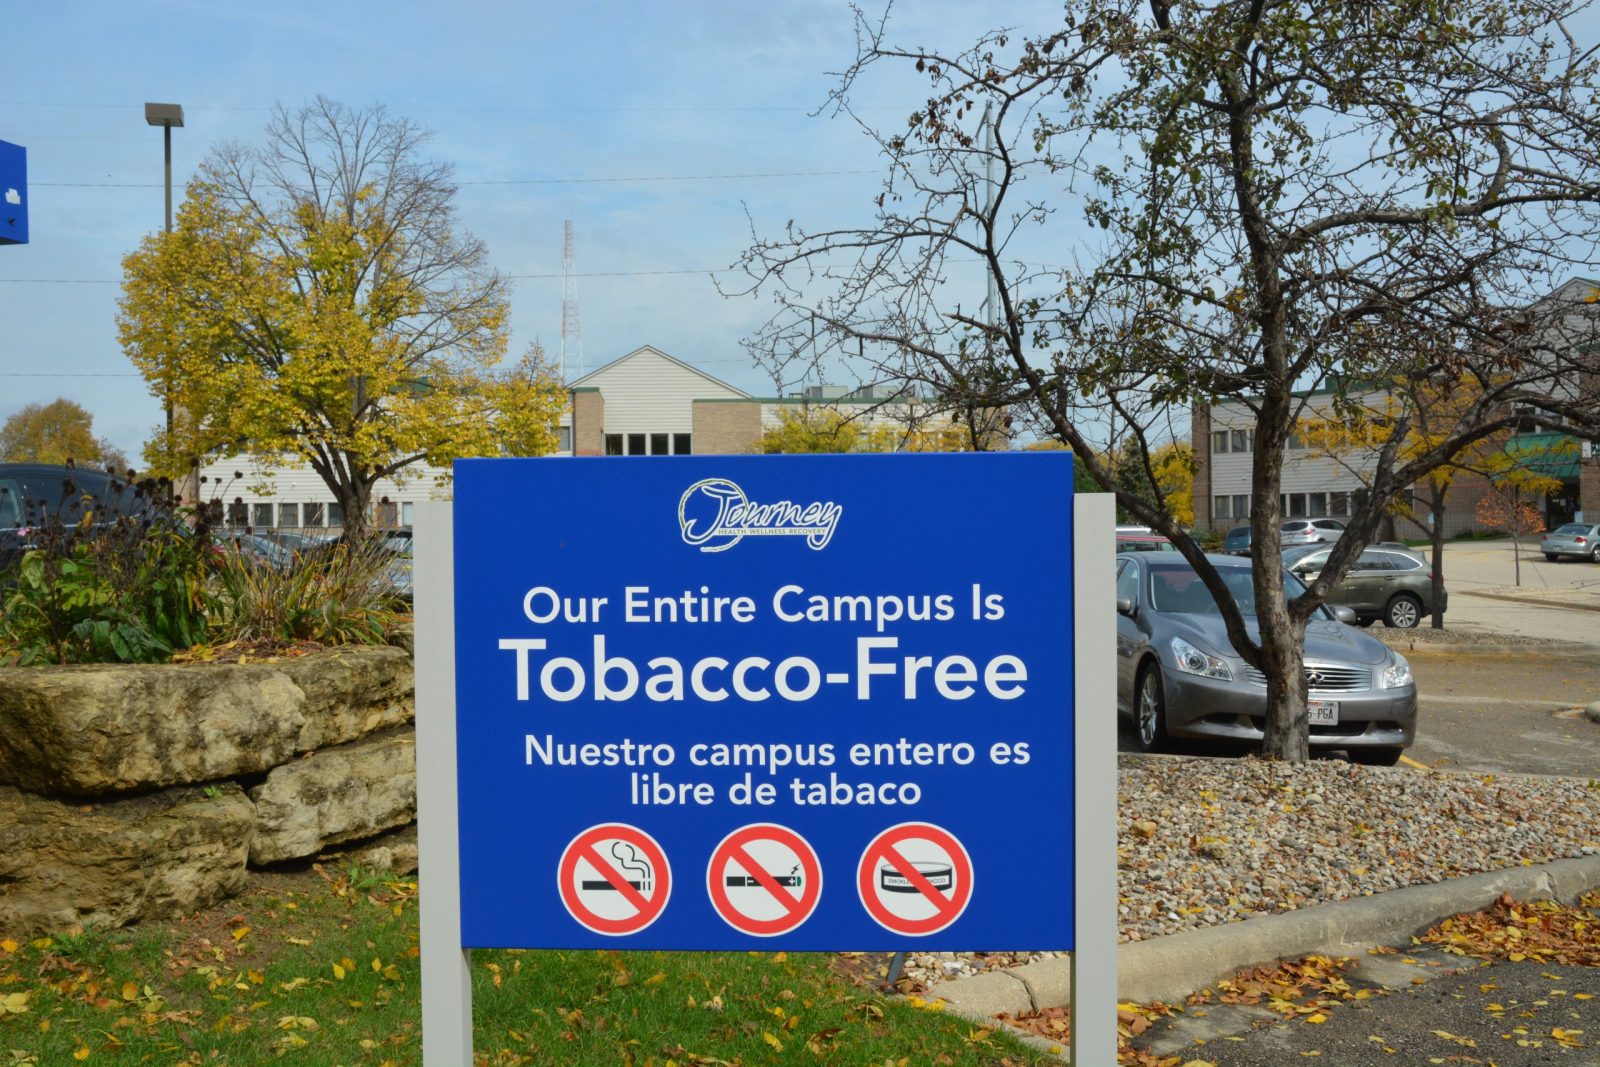 Journey is a tobacco-free campus